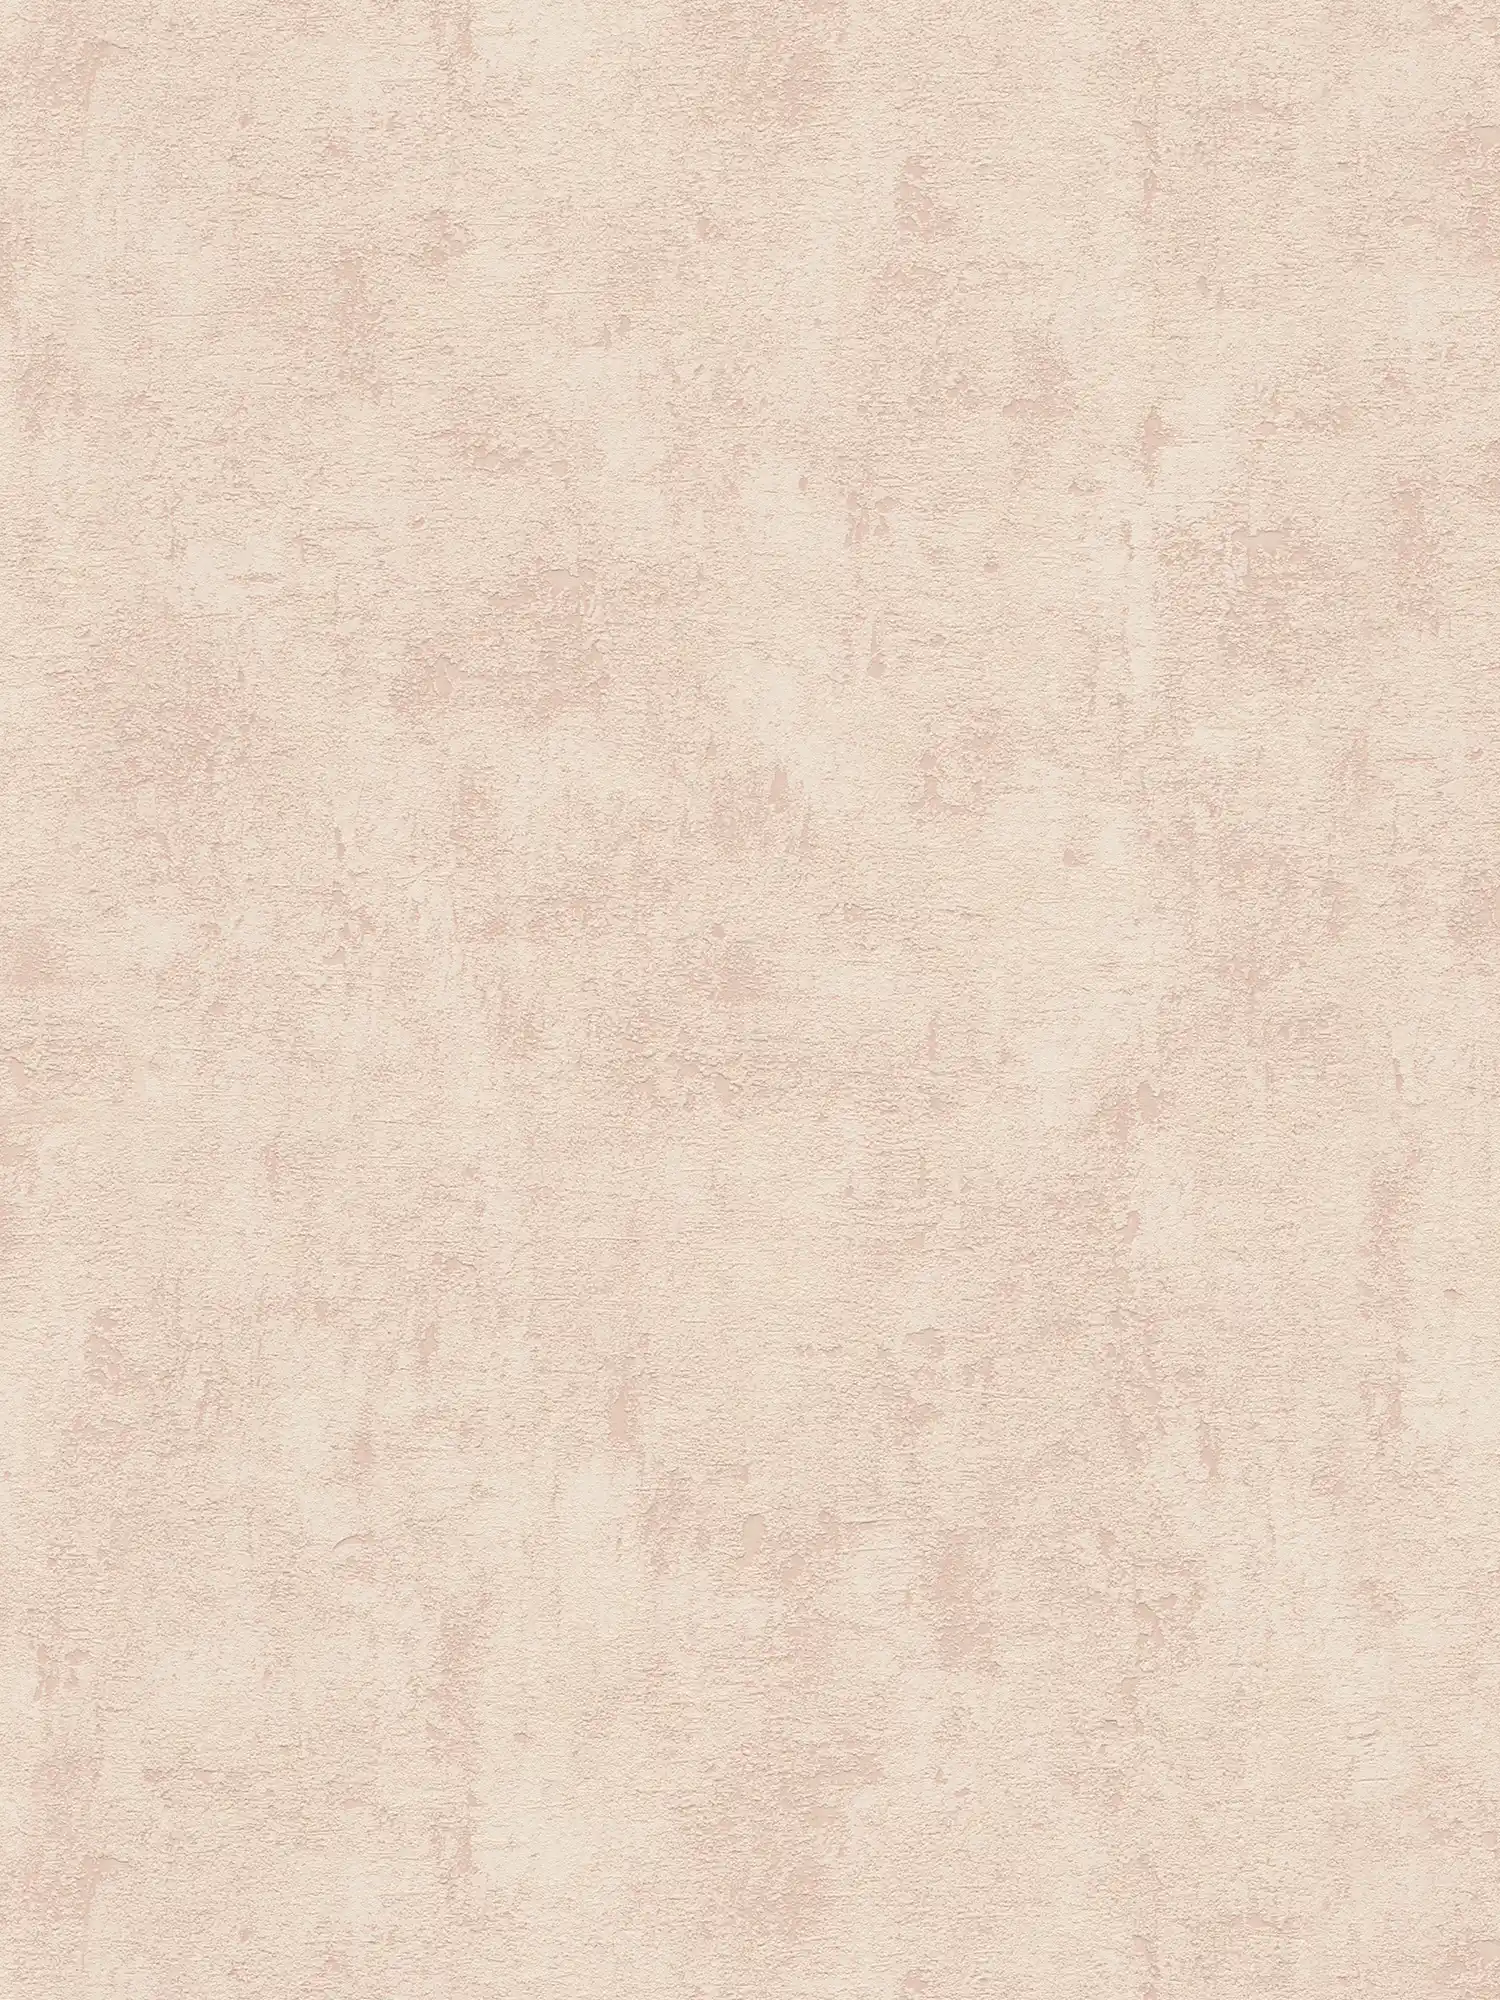 Plaster optics wallpaper non-woven in sand-beige with texture effect
